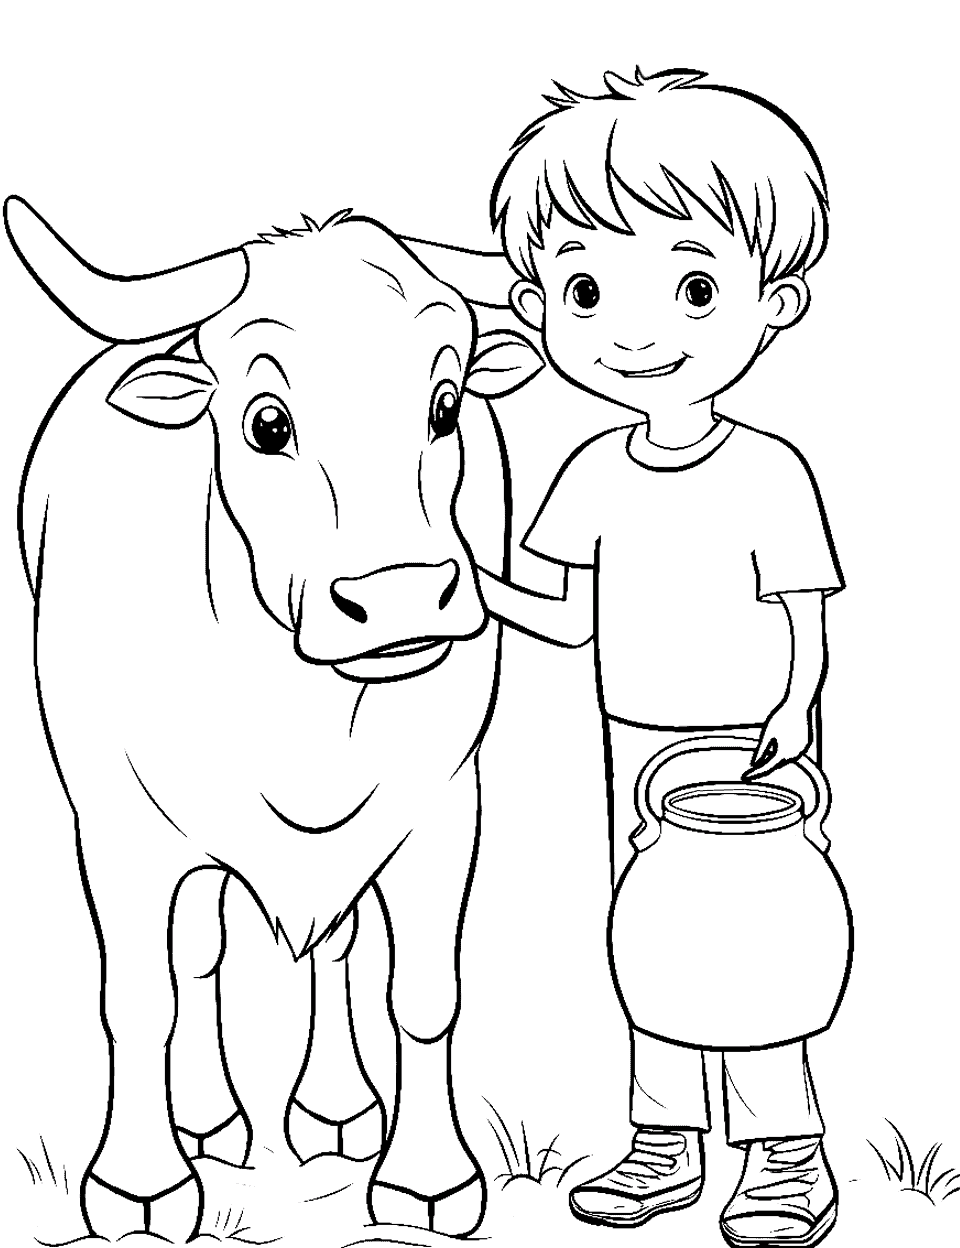 Kid and a Milk Pail Coloring Page - A cheerful kid holding a pail of milk next to a tranquil cow.